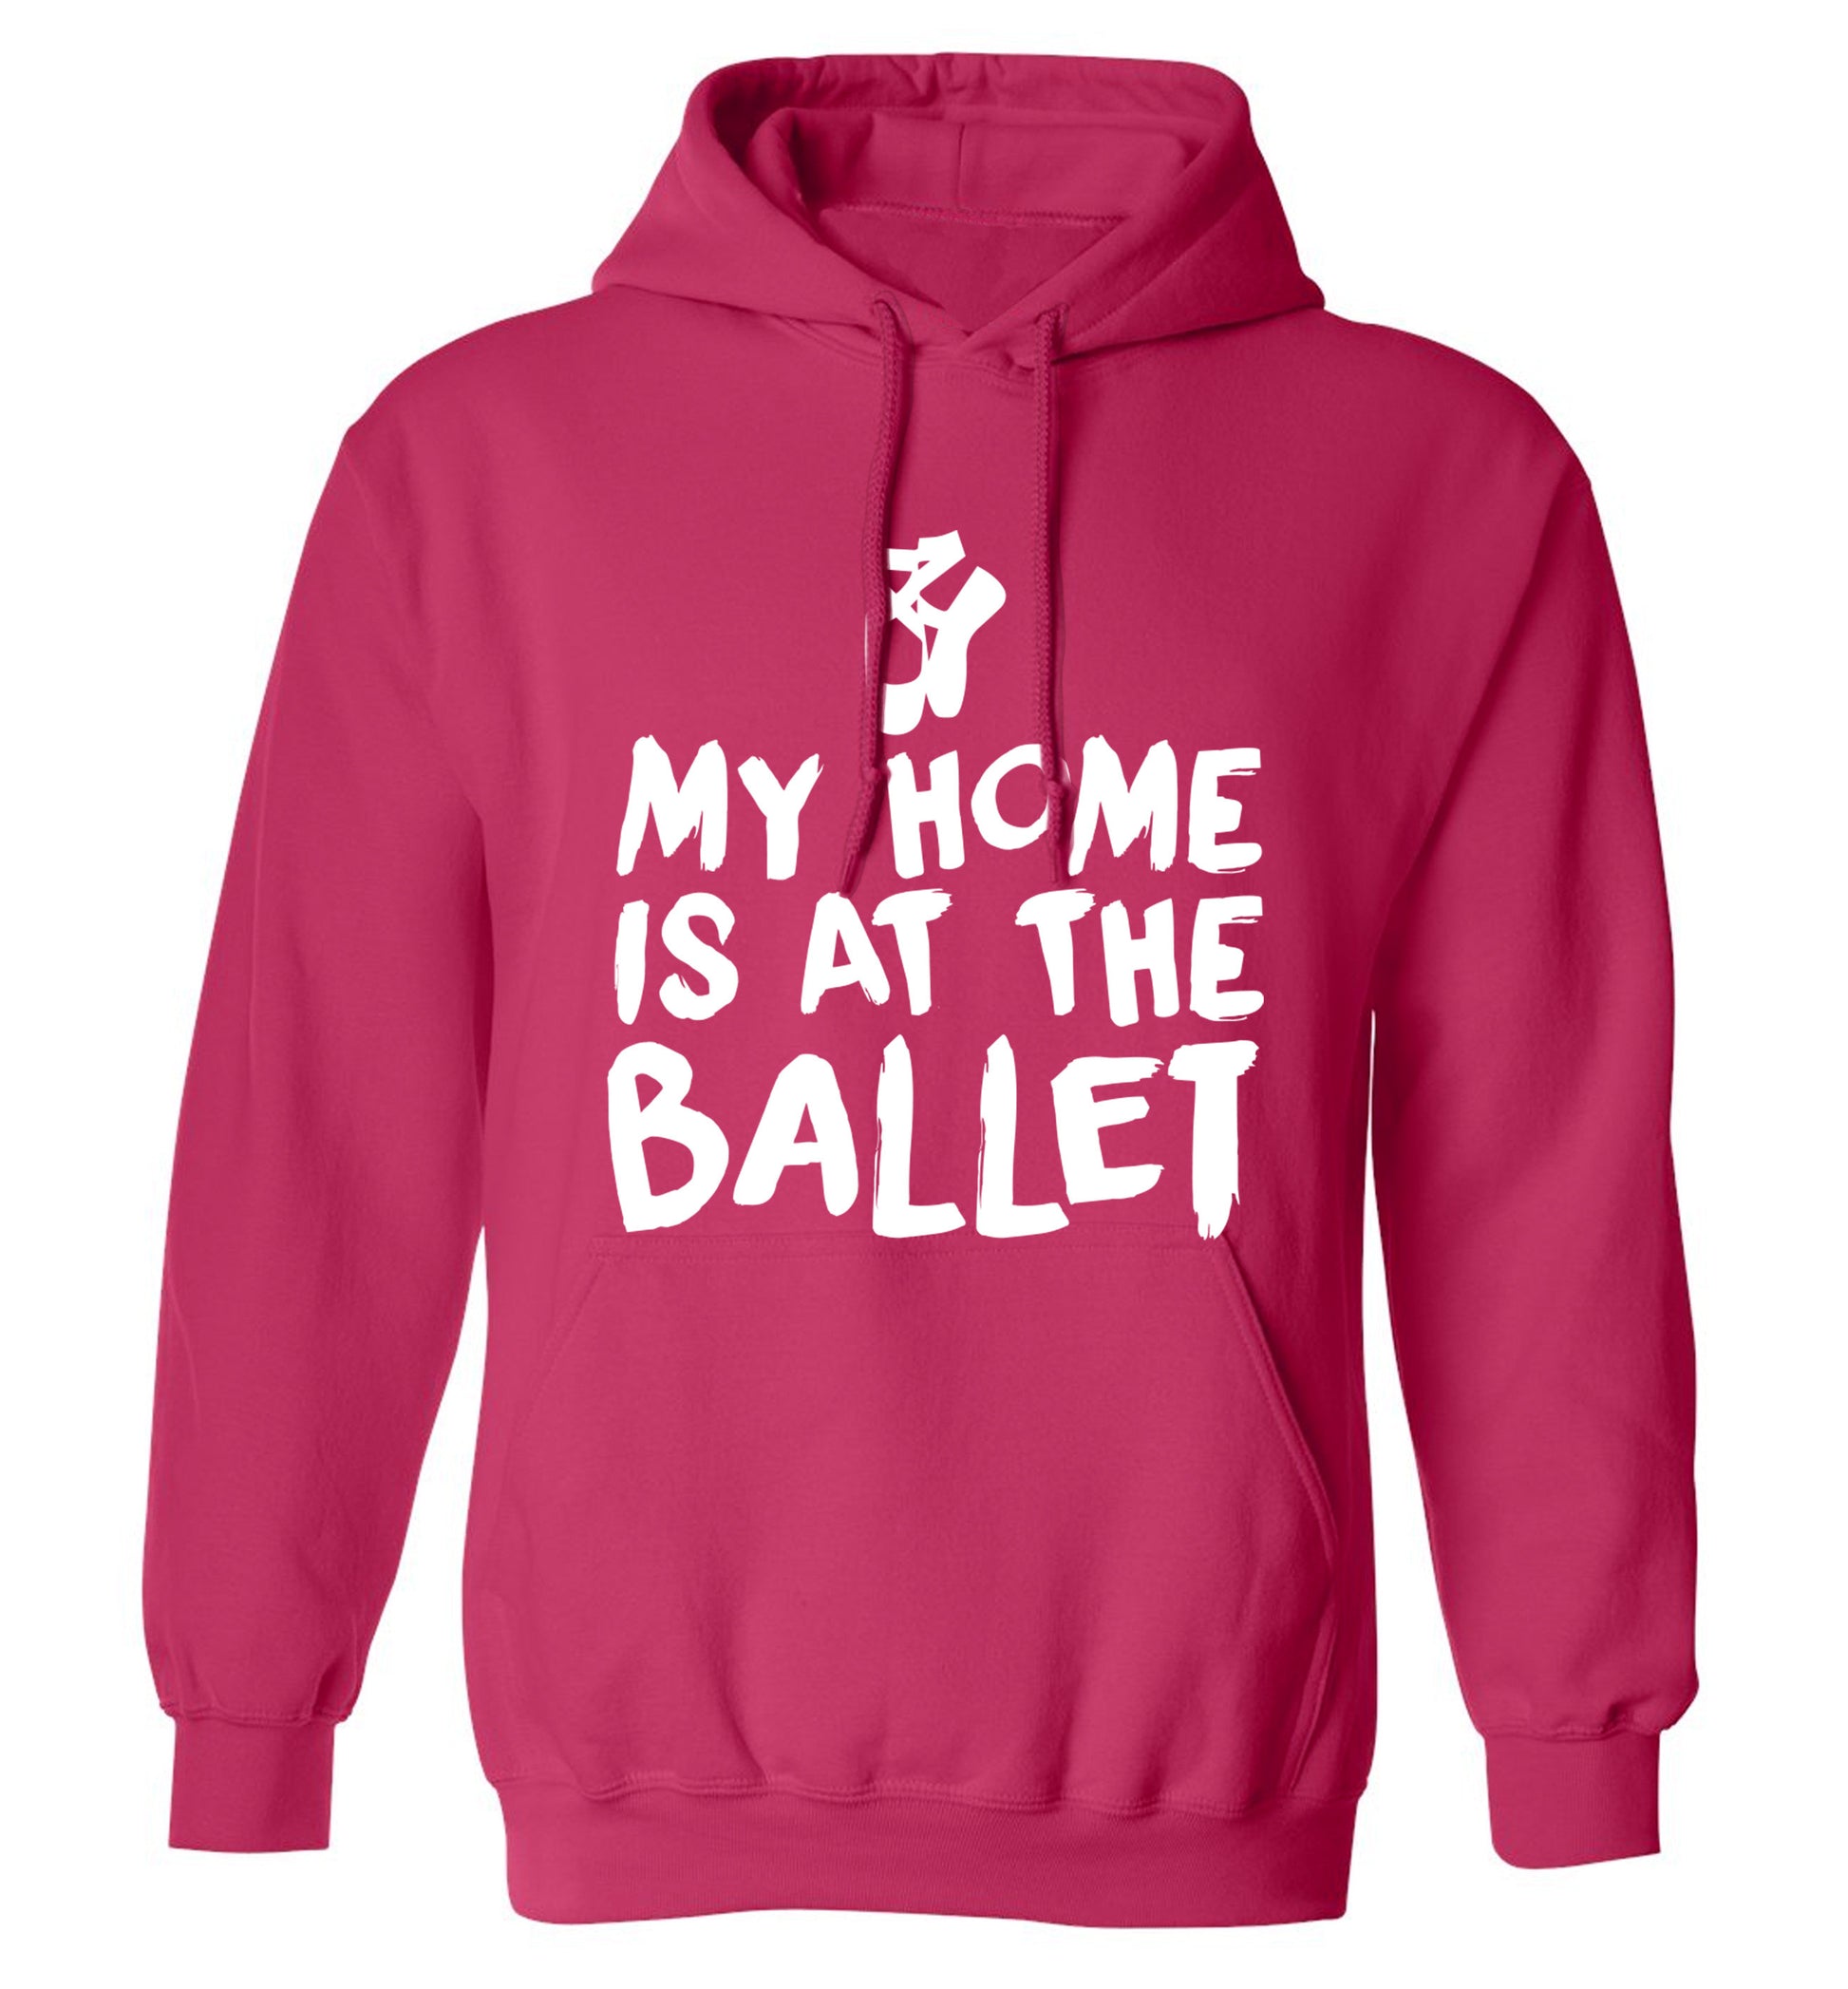 My home is at the dance studio adults unisex pink hoodie 2XL